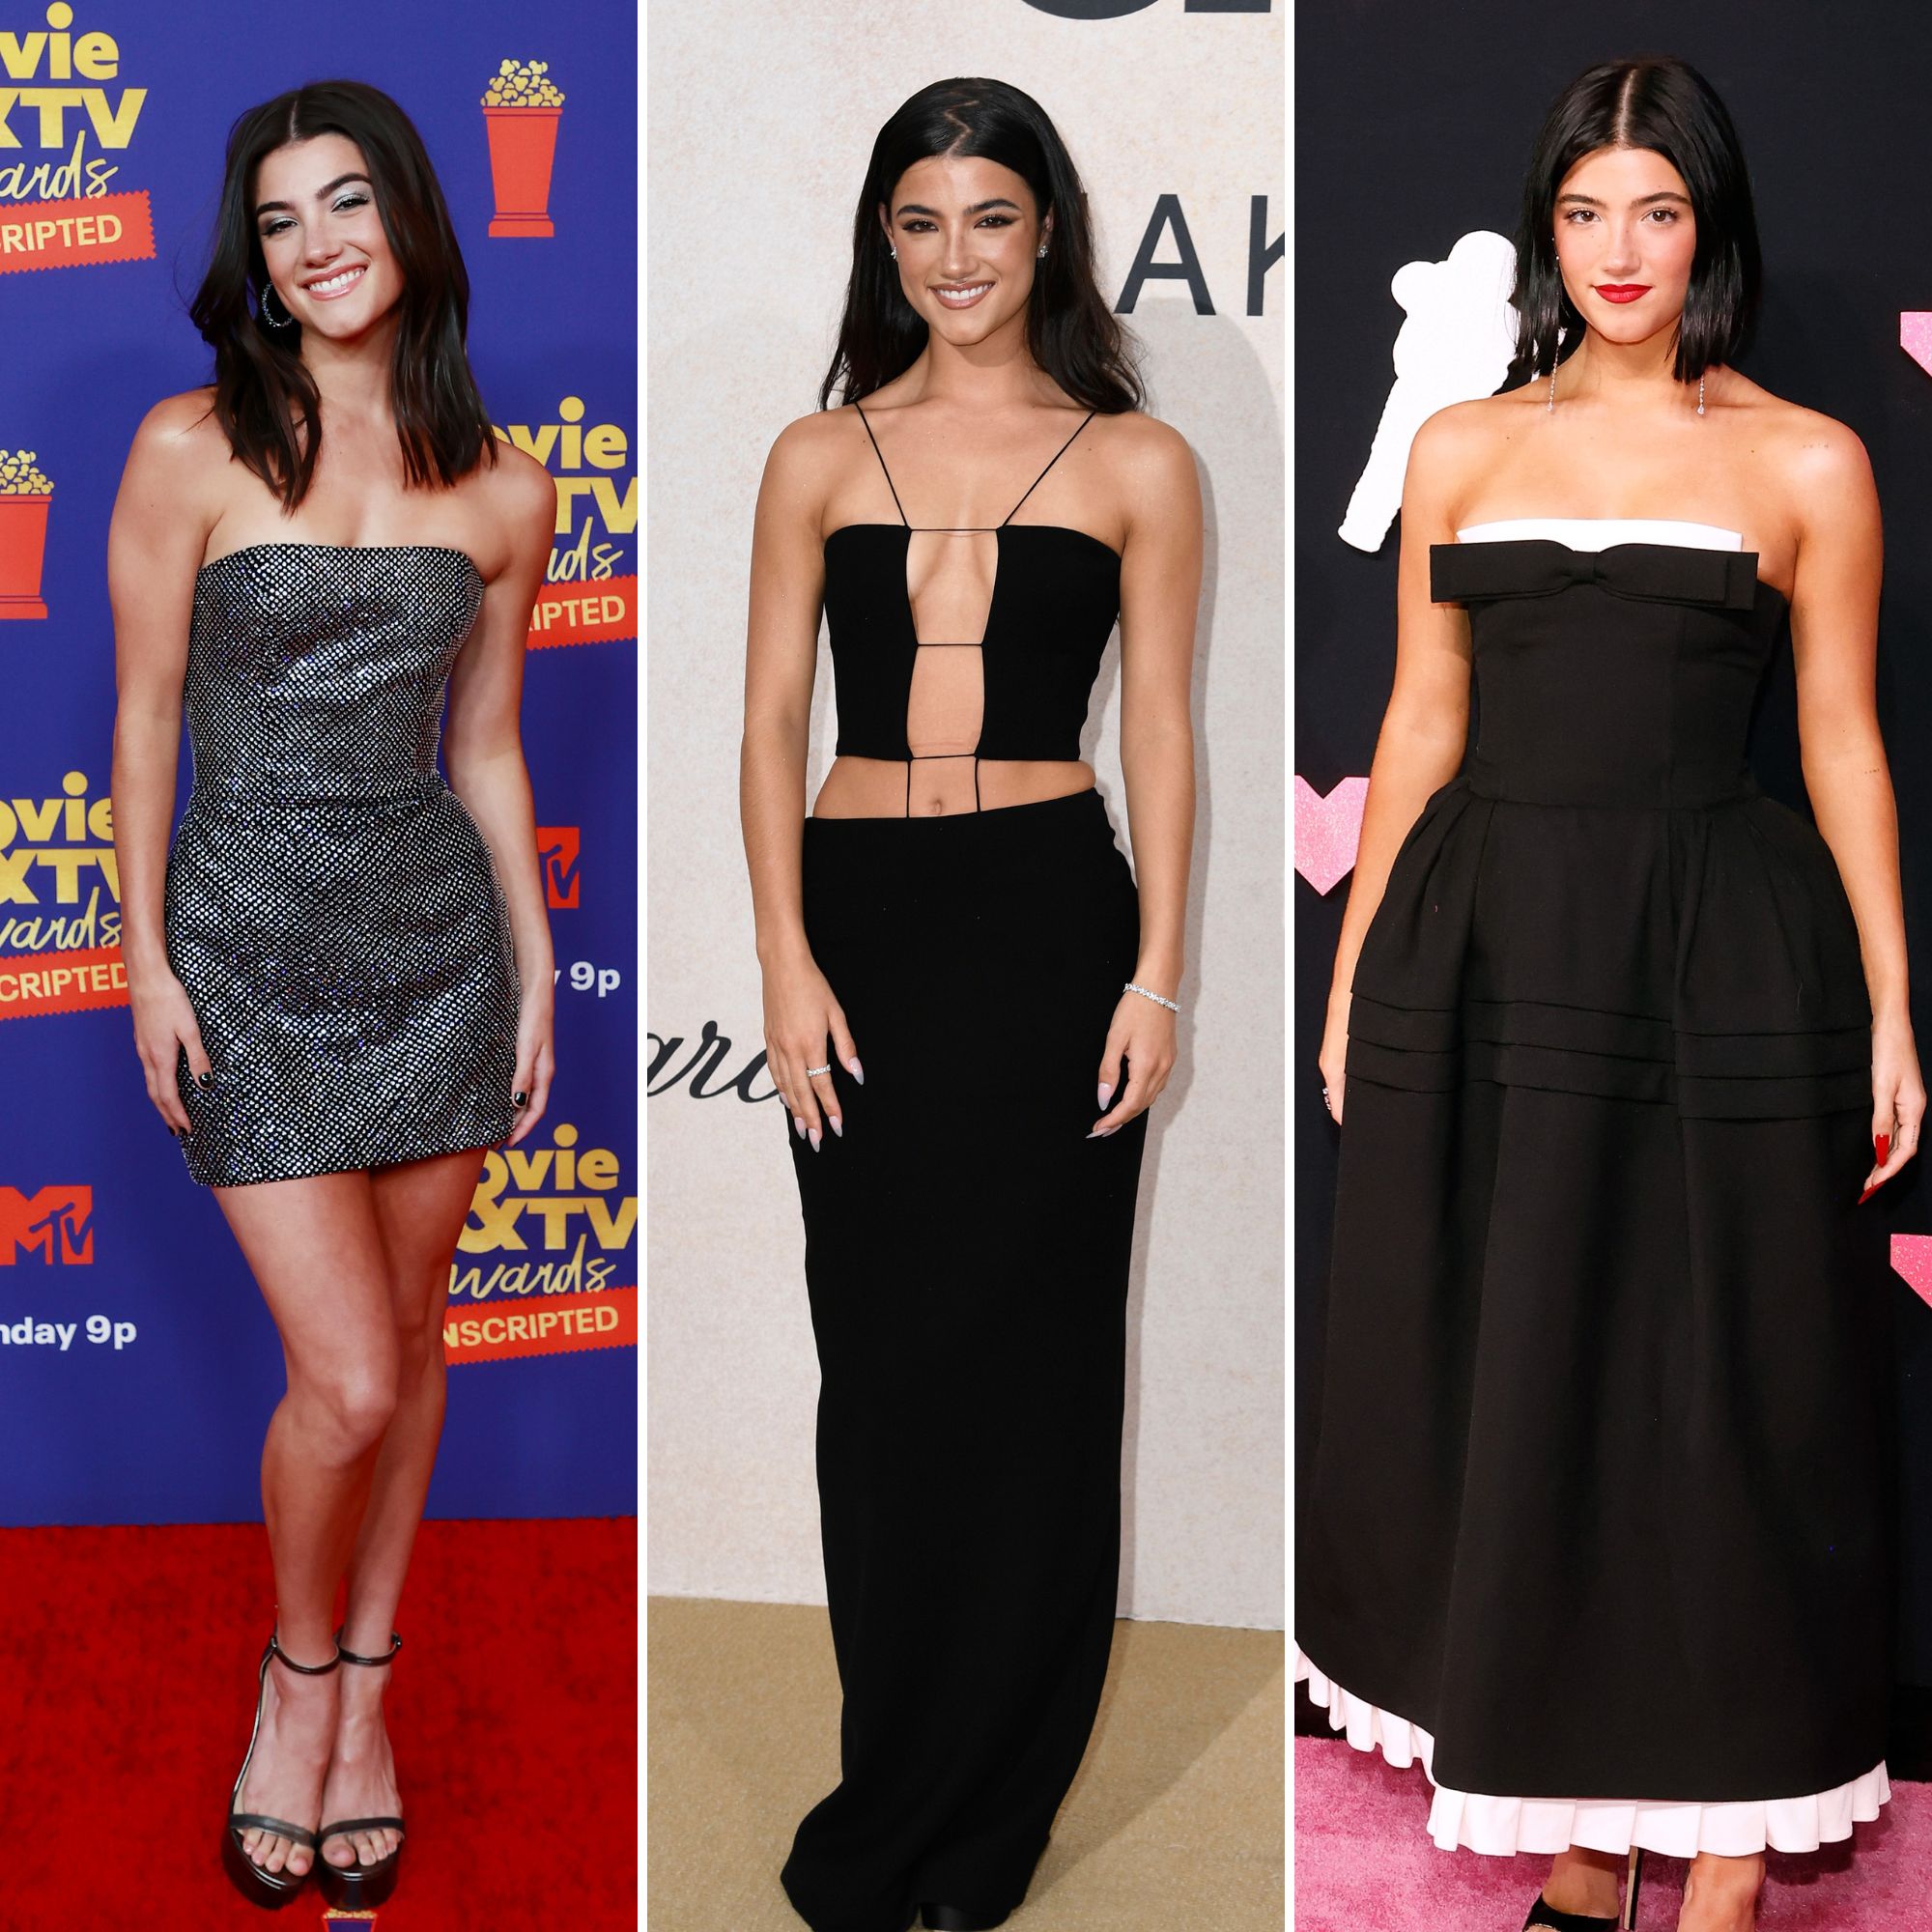 Star Style: Hot Young Fashion on the Red Carpet